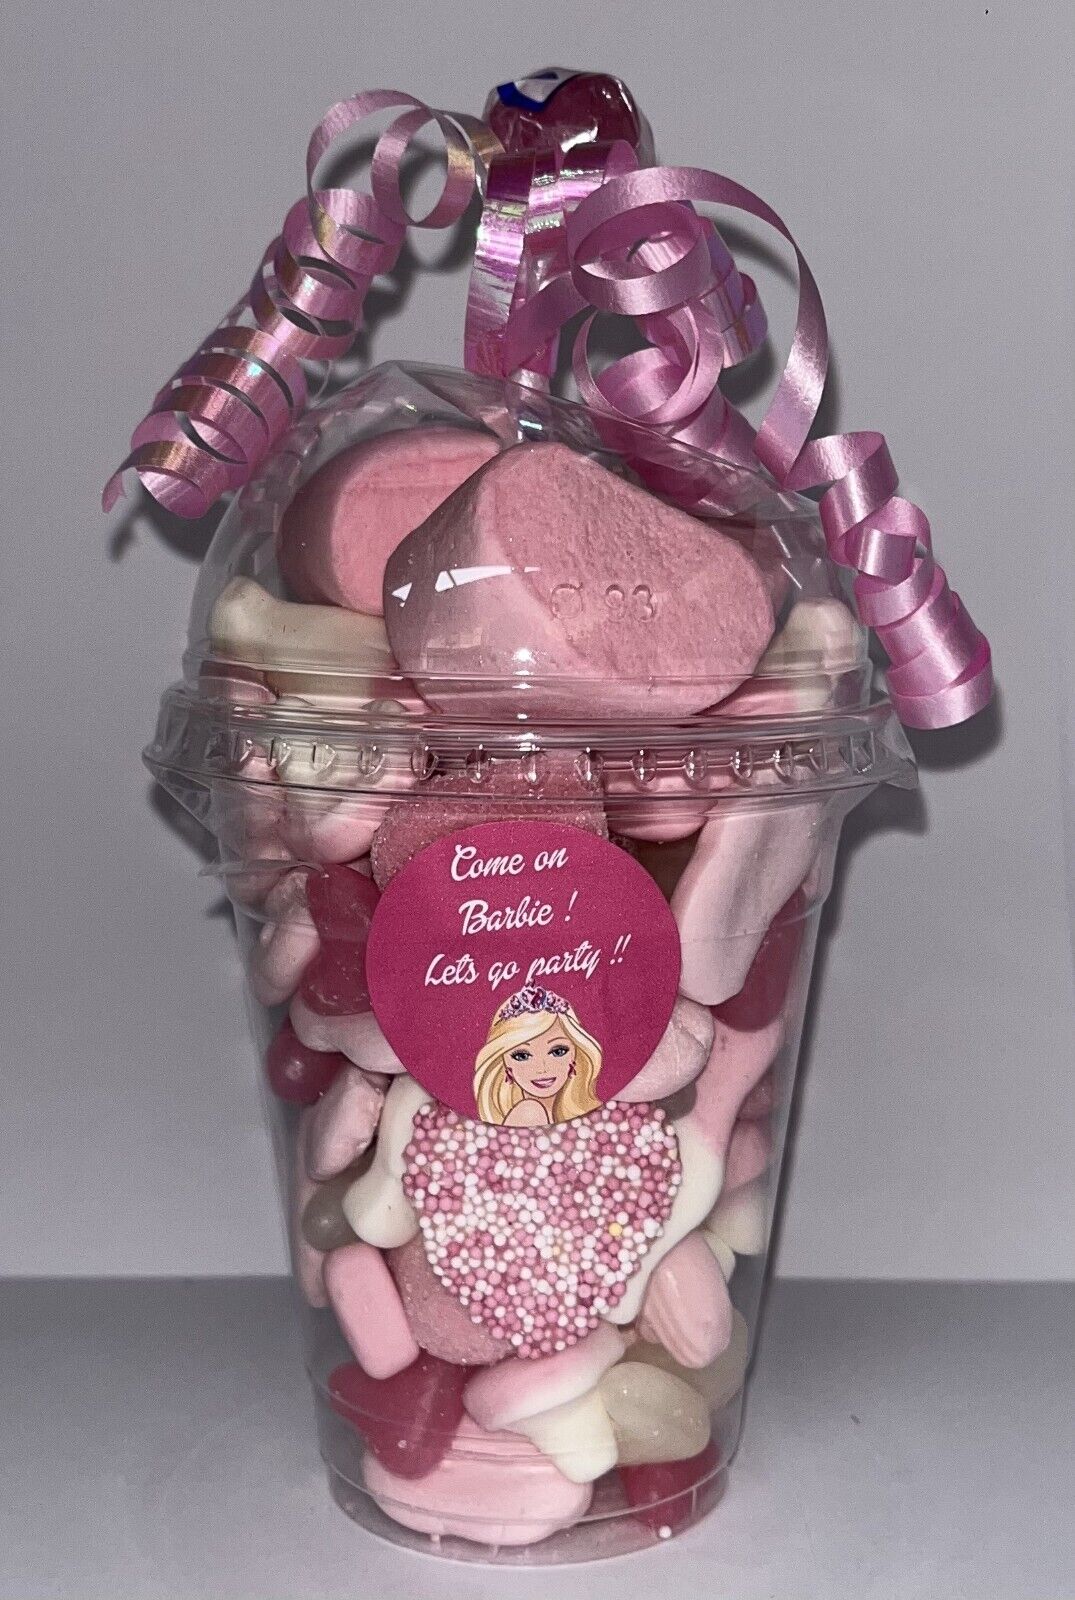 Barbie Inspired Themed Gummy Jelly Sweet Cinema Movie Night Mix Bag Kids Pink Pick n Mix Gift